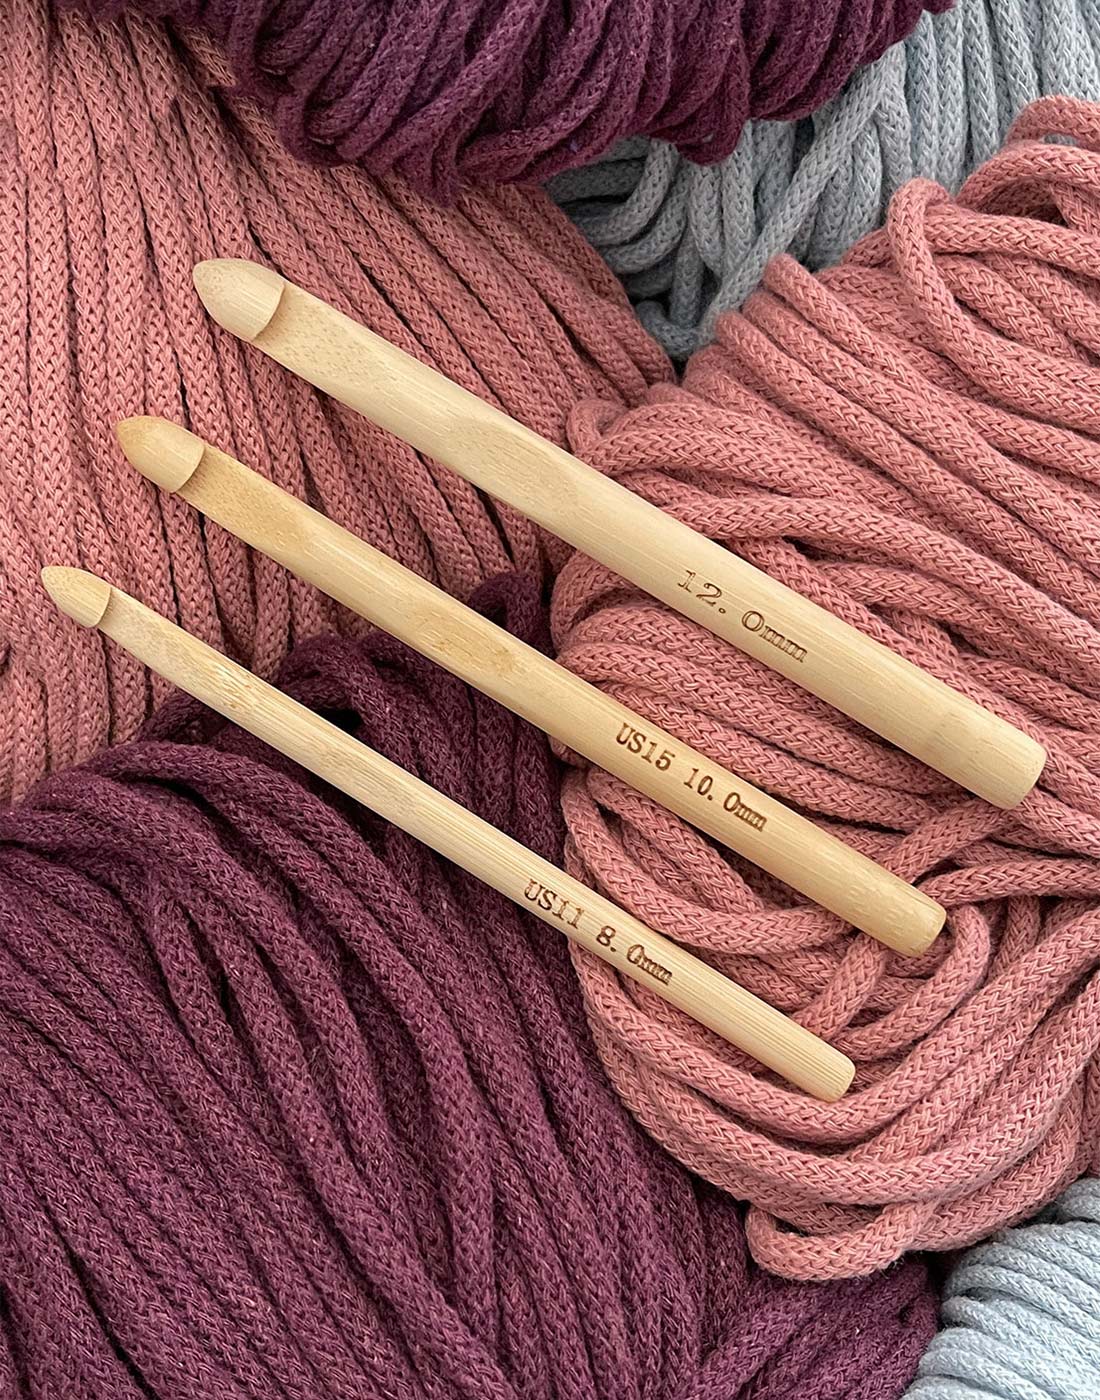 Browse our range of crochet hooks